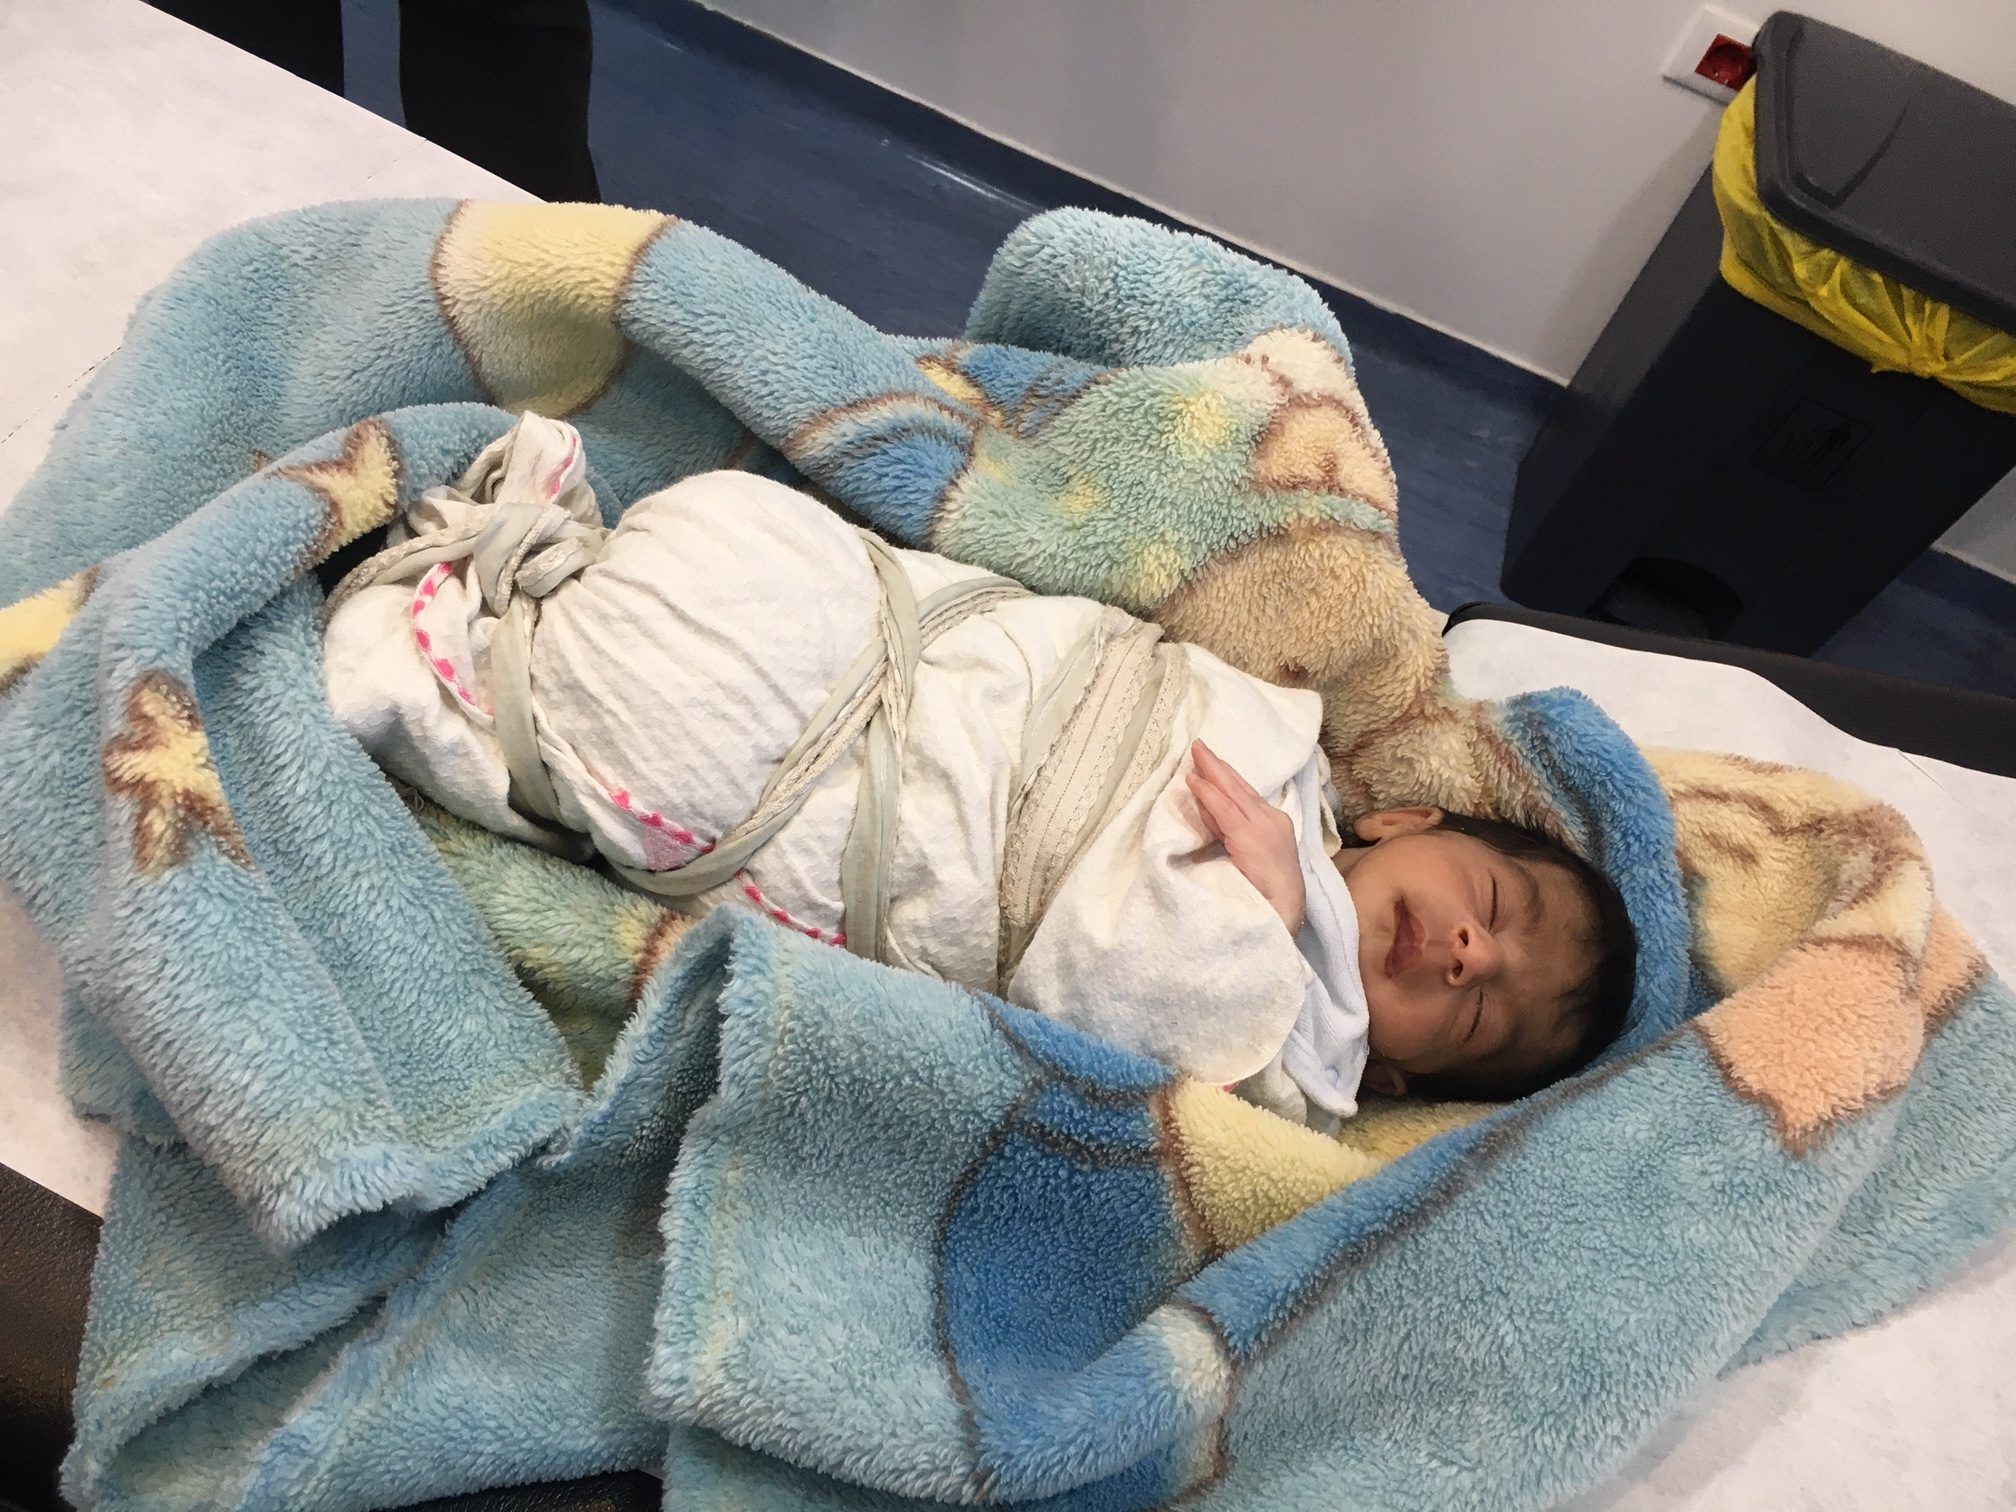 Baby Cedra had a vital operation thanks to donations   